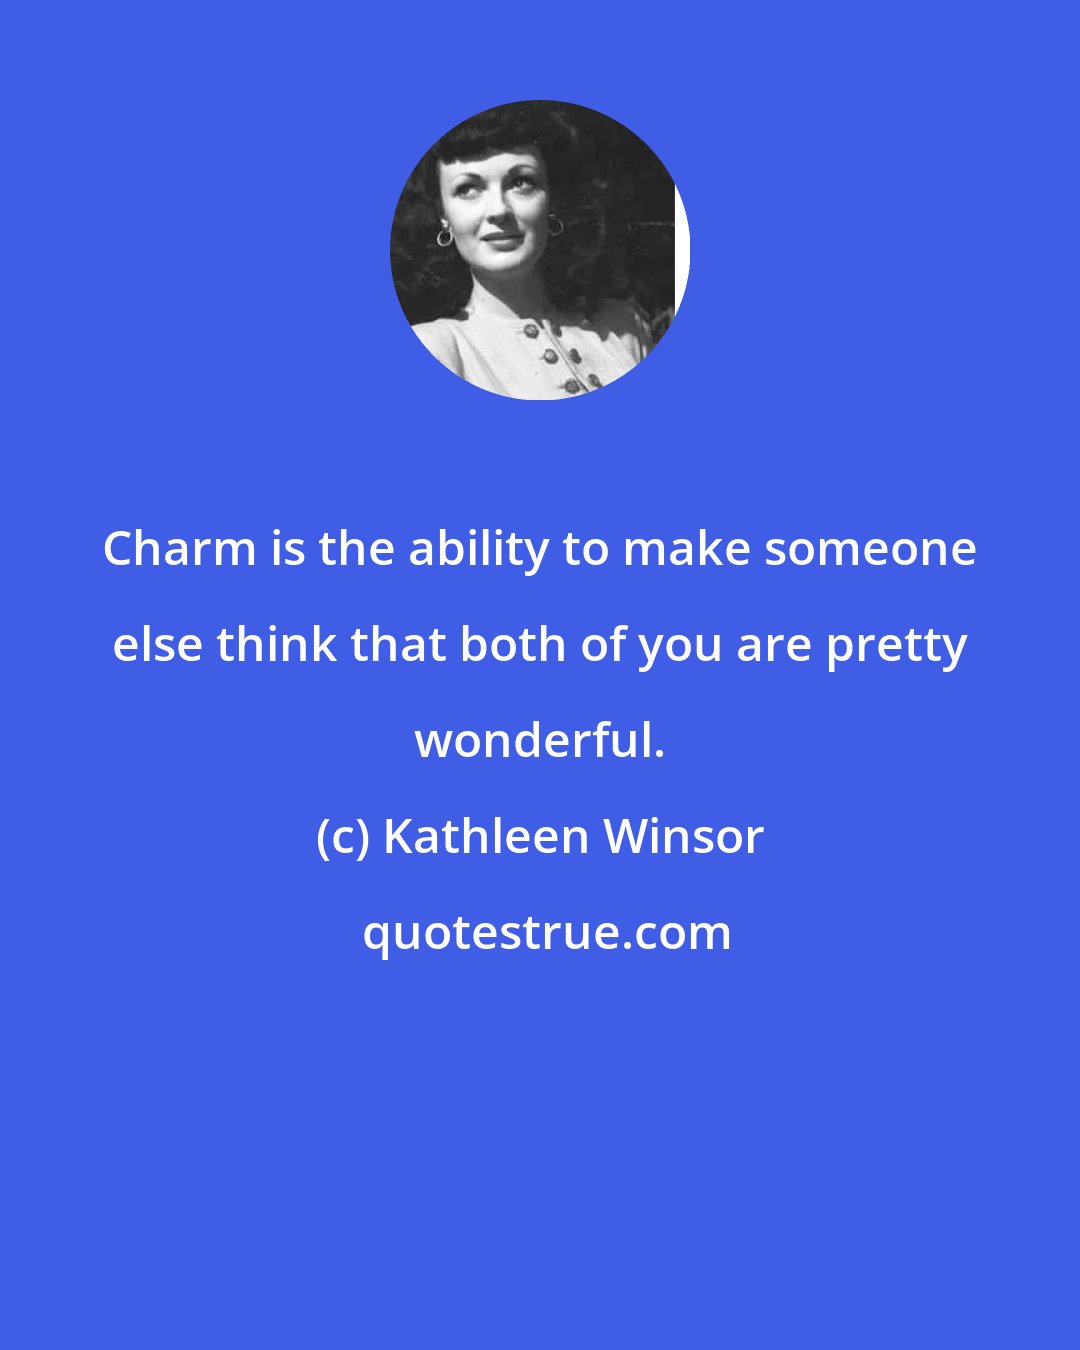 Kathleen Winsor: Charm is the ability to make someone else think that both of you are pretty wonderful.